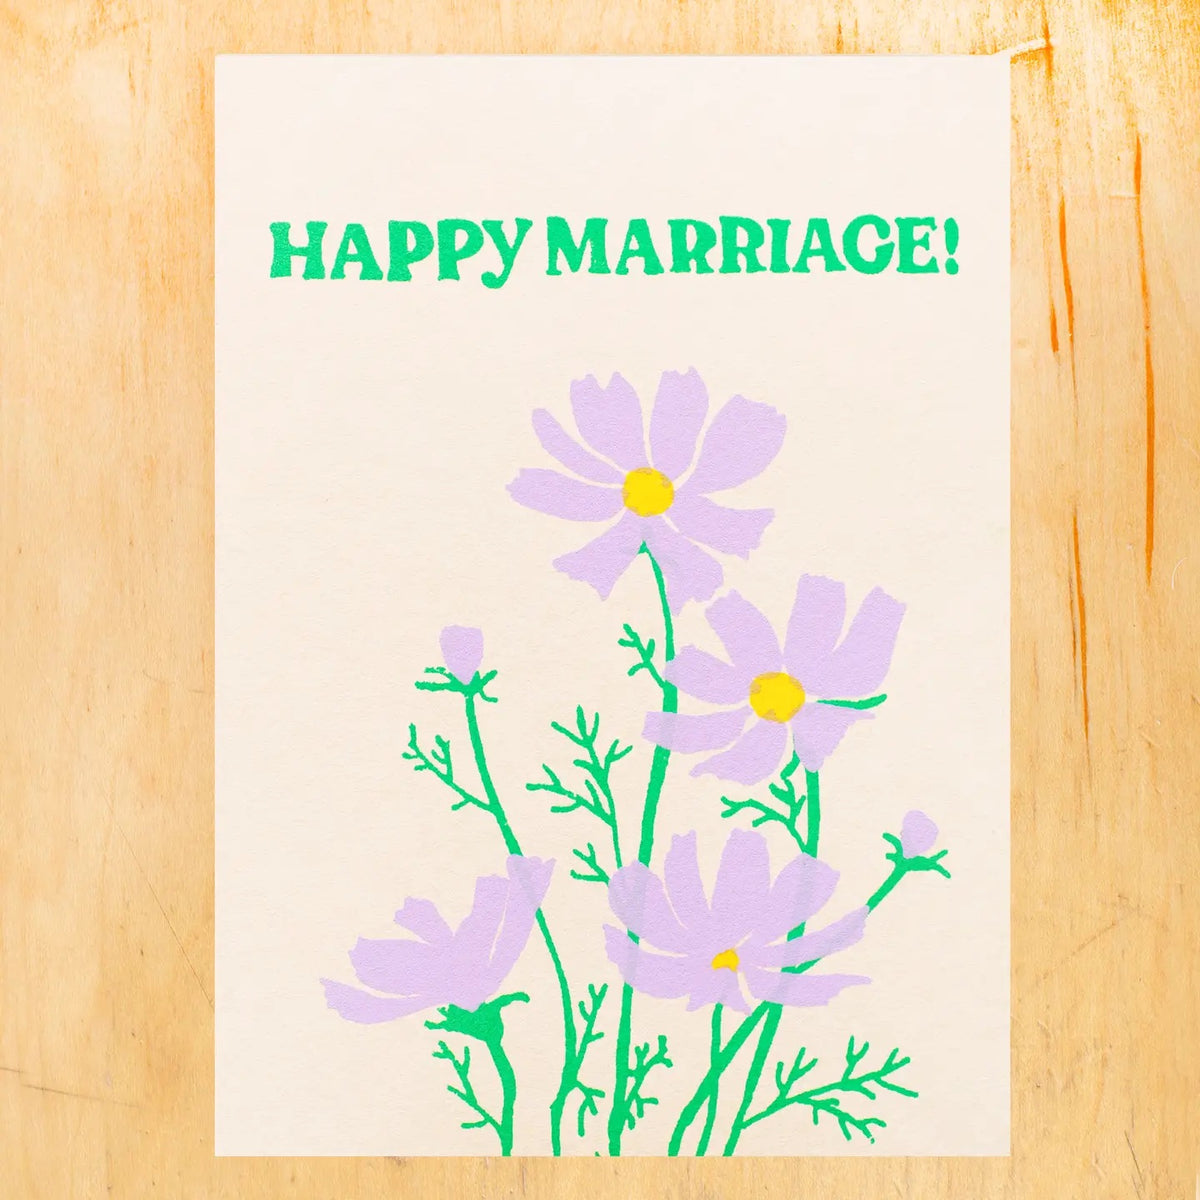 Happy Marriage Card